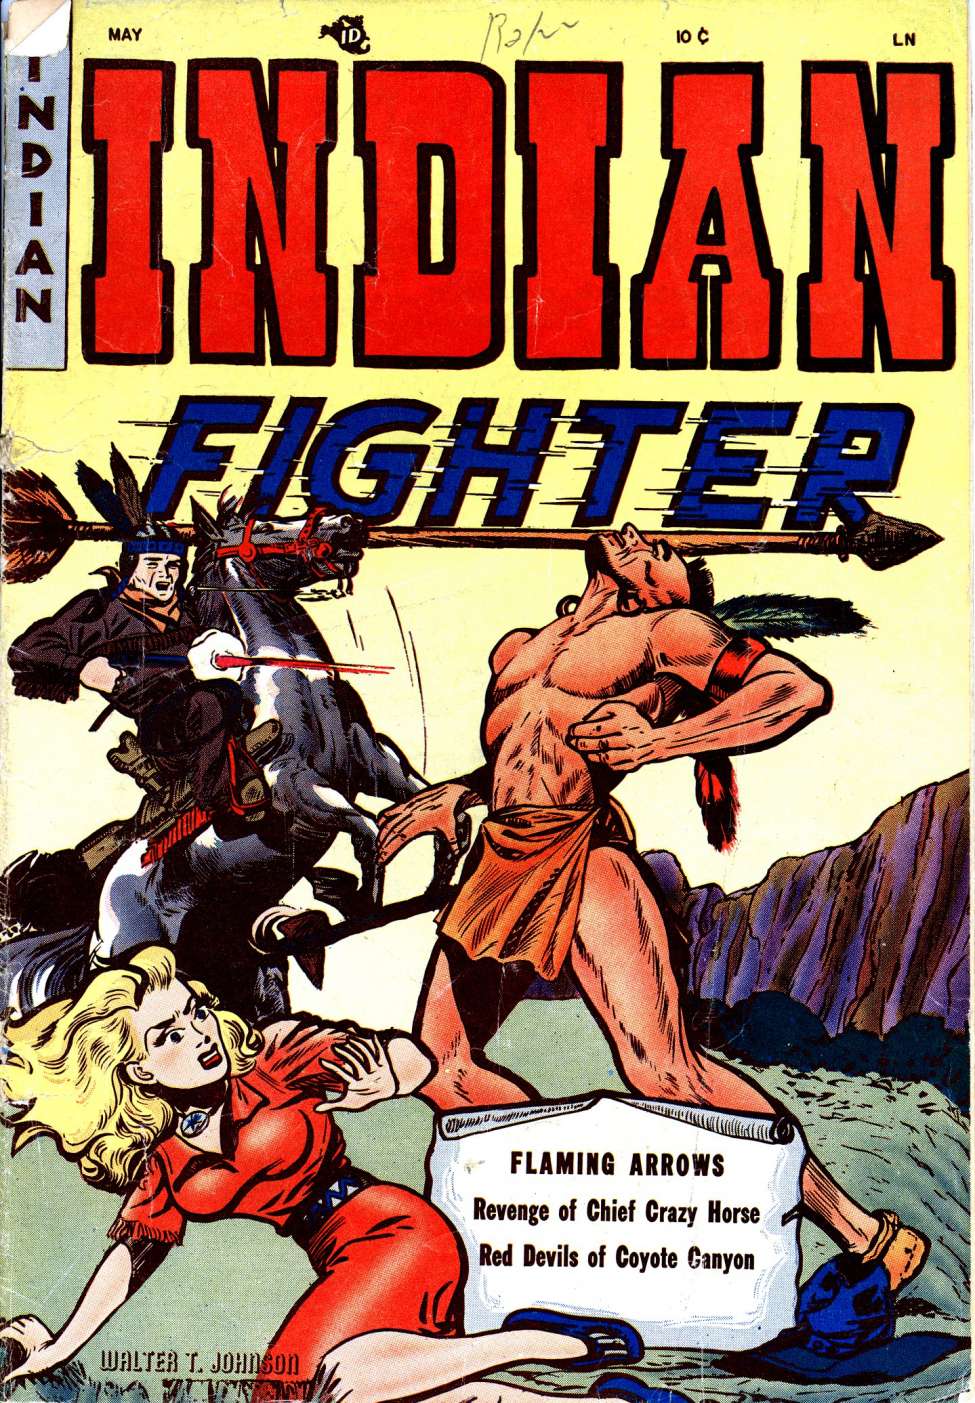 Indian Fighter #1, Youthful Magazines